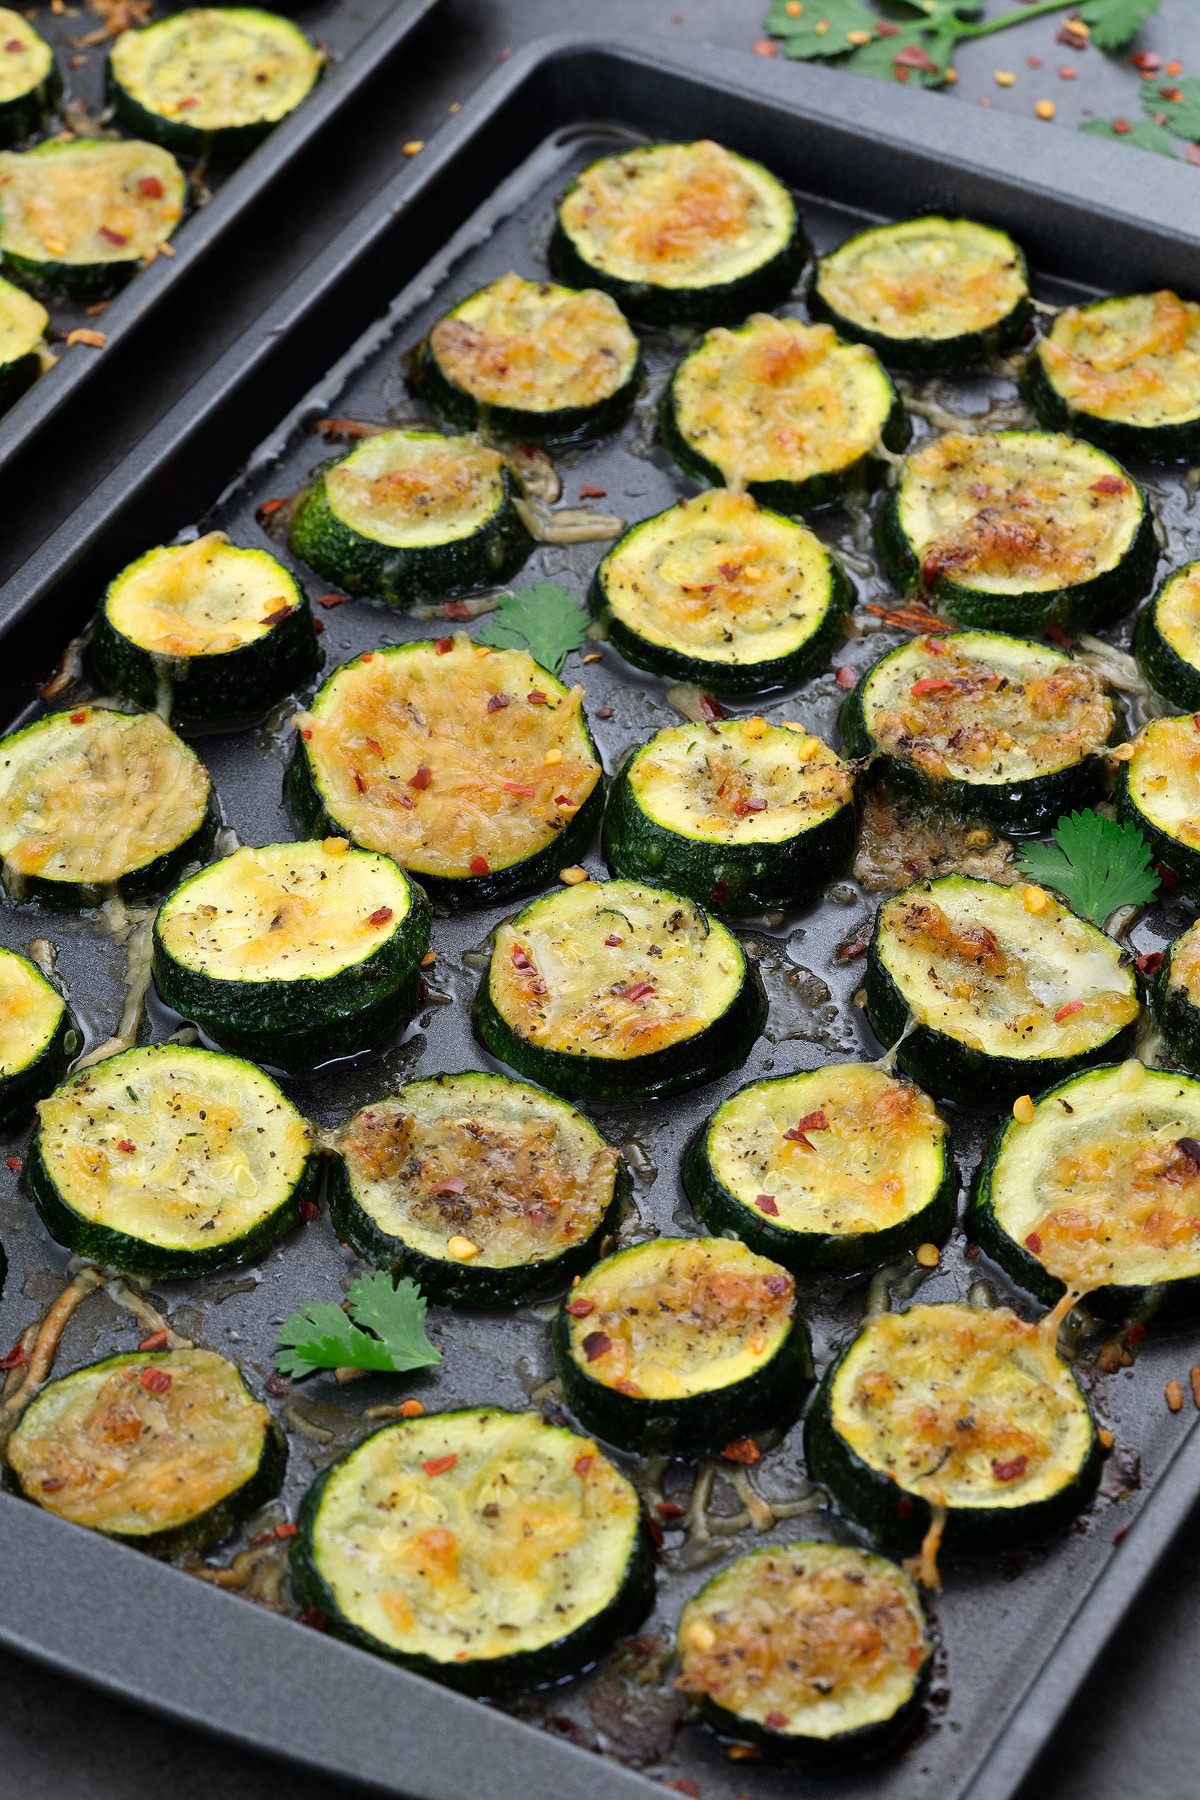 Roasted Zucchini in a baking tray.